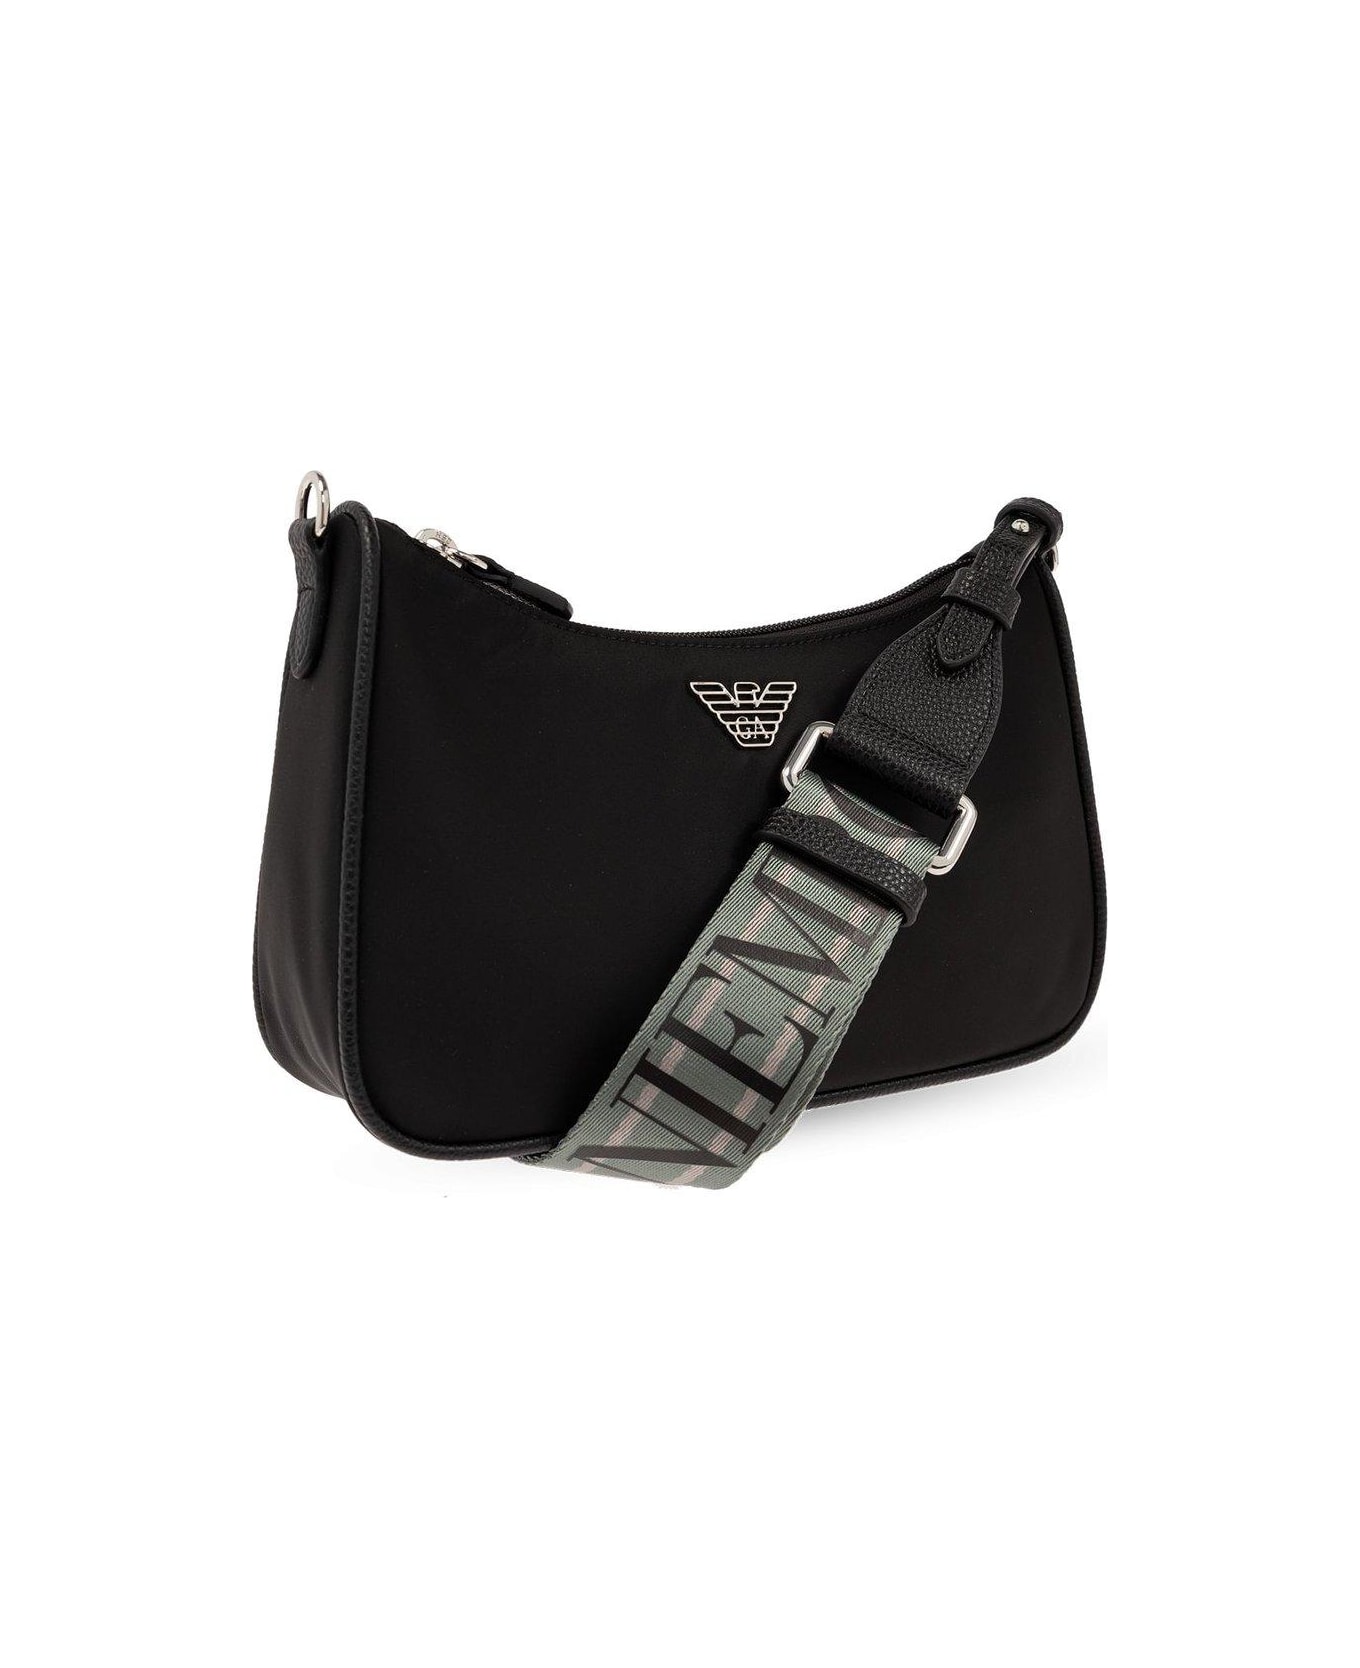 Emporio Armani Sustainable Collection Shoulder Bag - Black トートバッグ